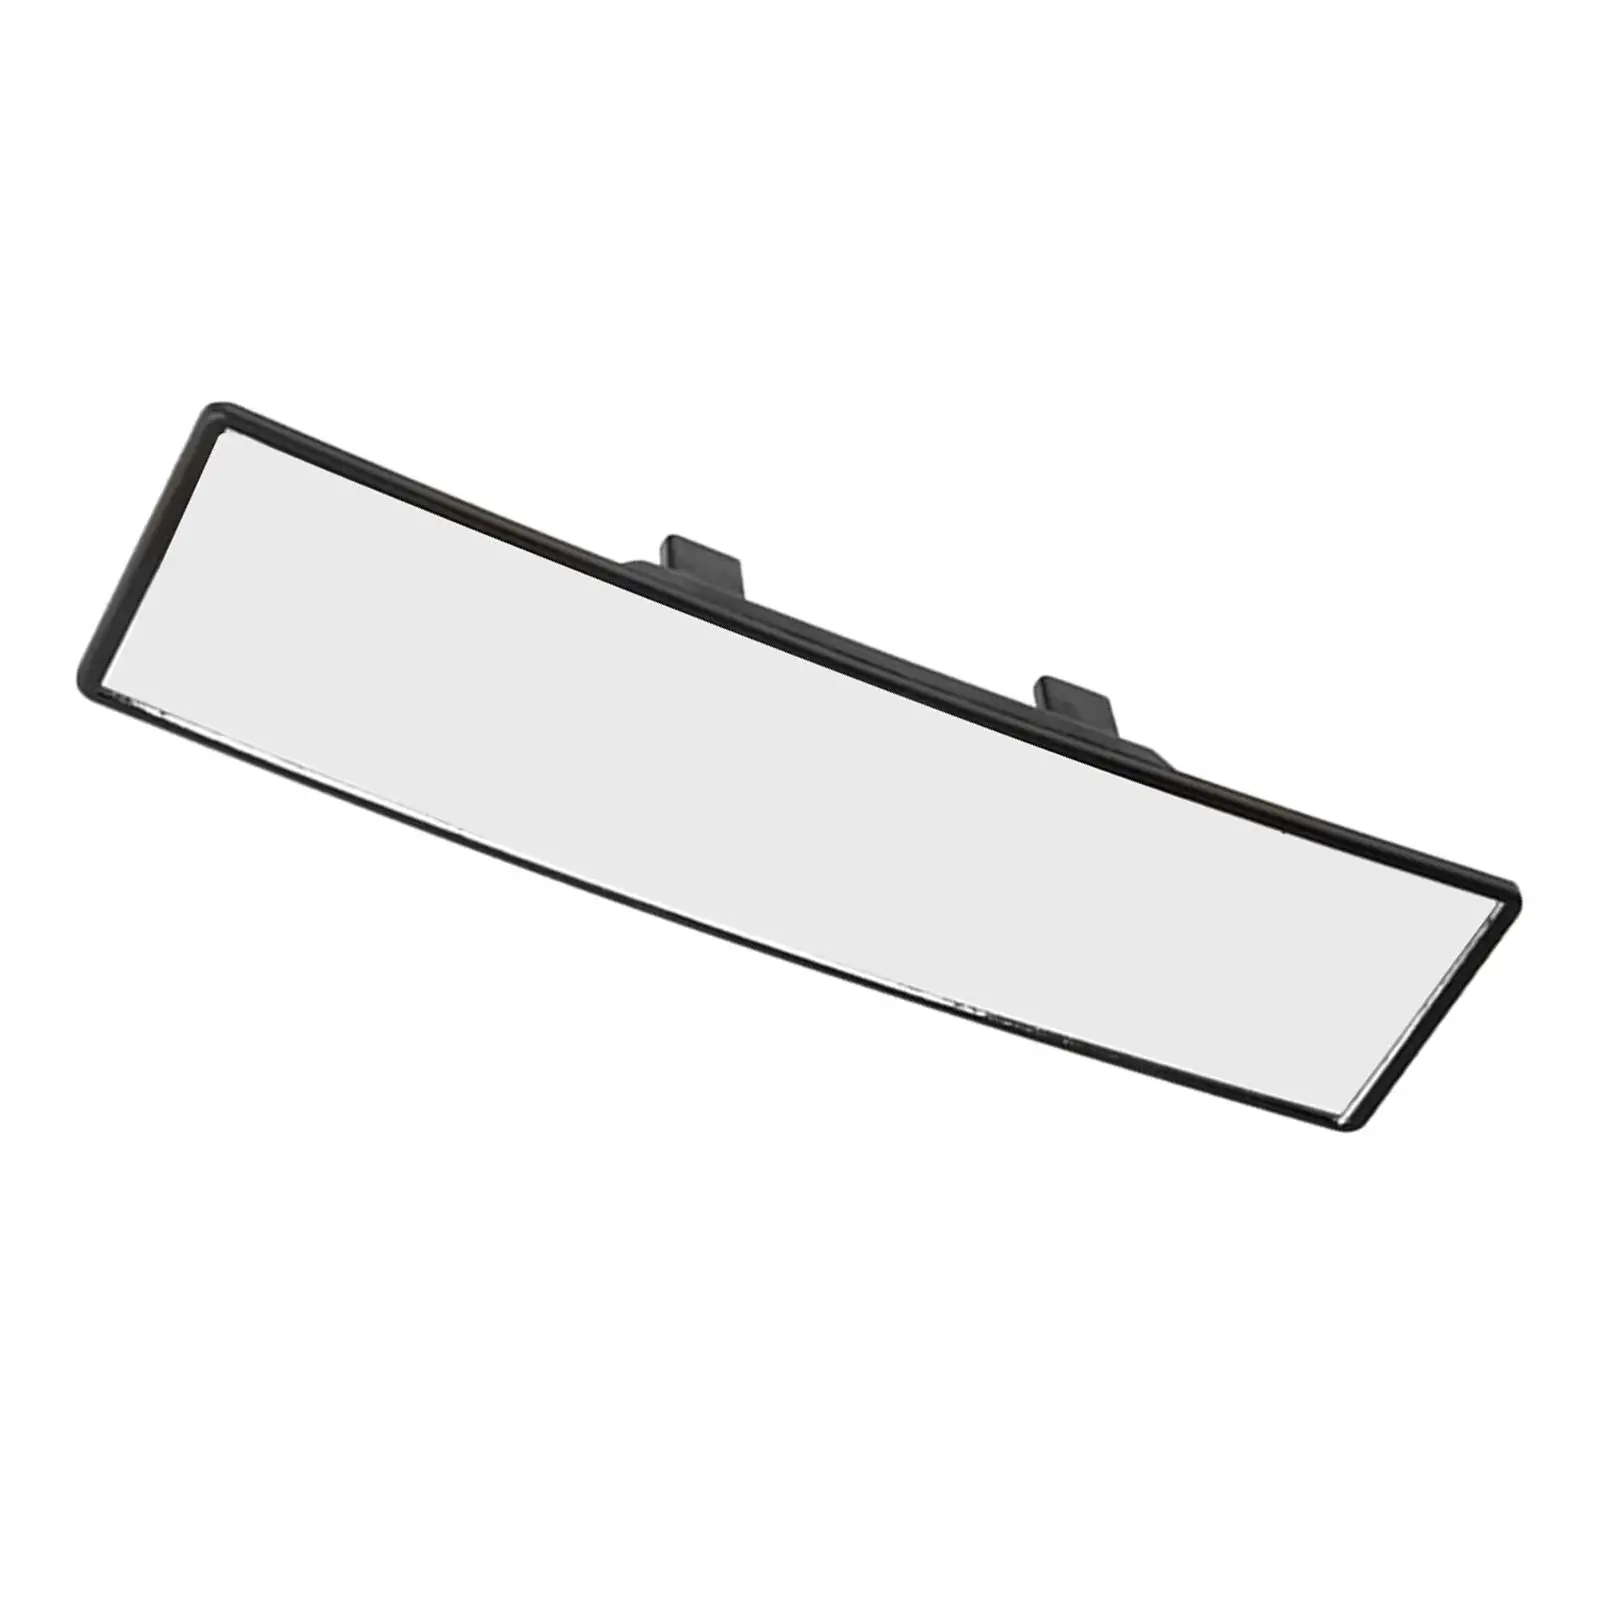 Rear View Mirror 11.2 inch Panoramic Rearview Mirror for Trucks Van SUV